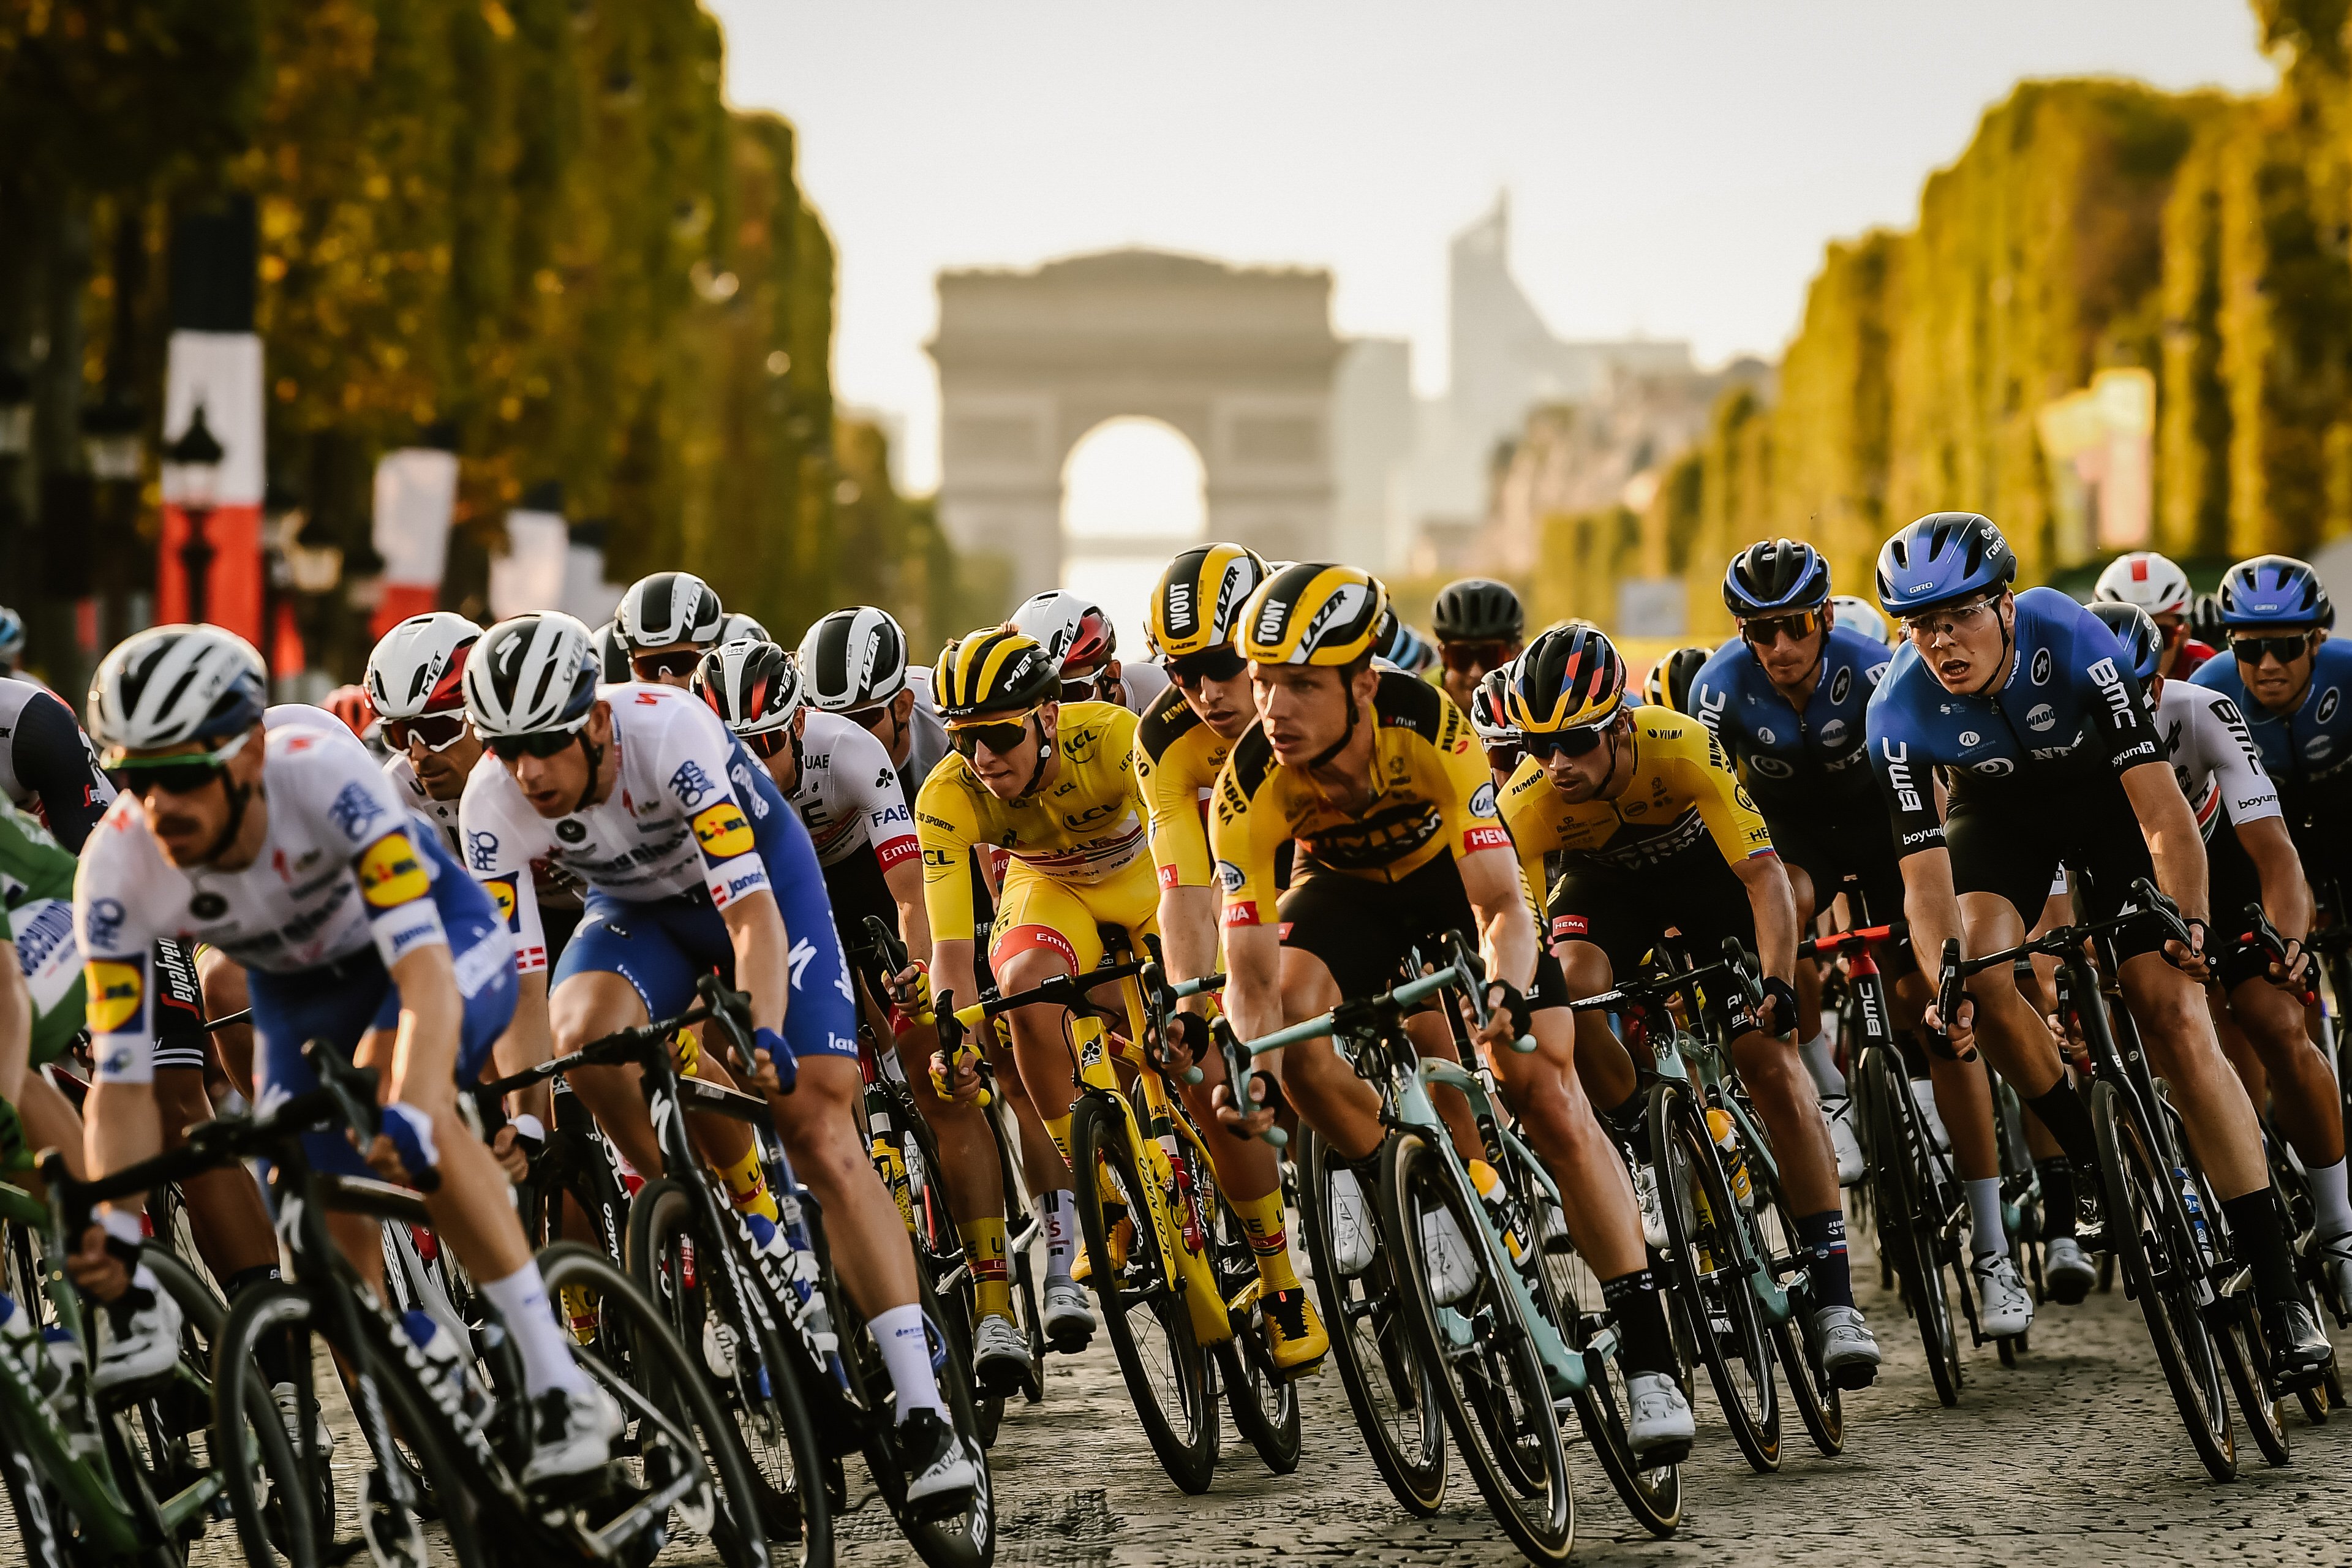 Yellow Jersey home, along with Young Rider and Polka-dots